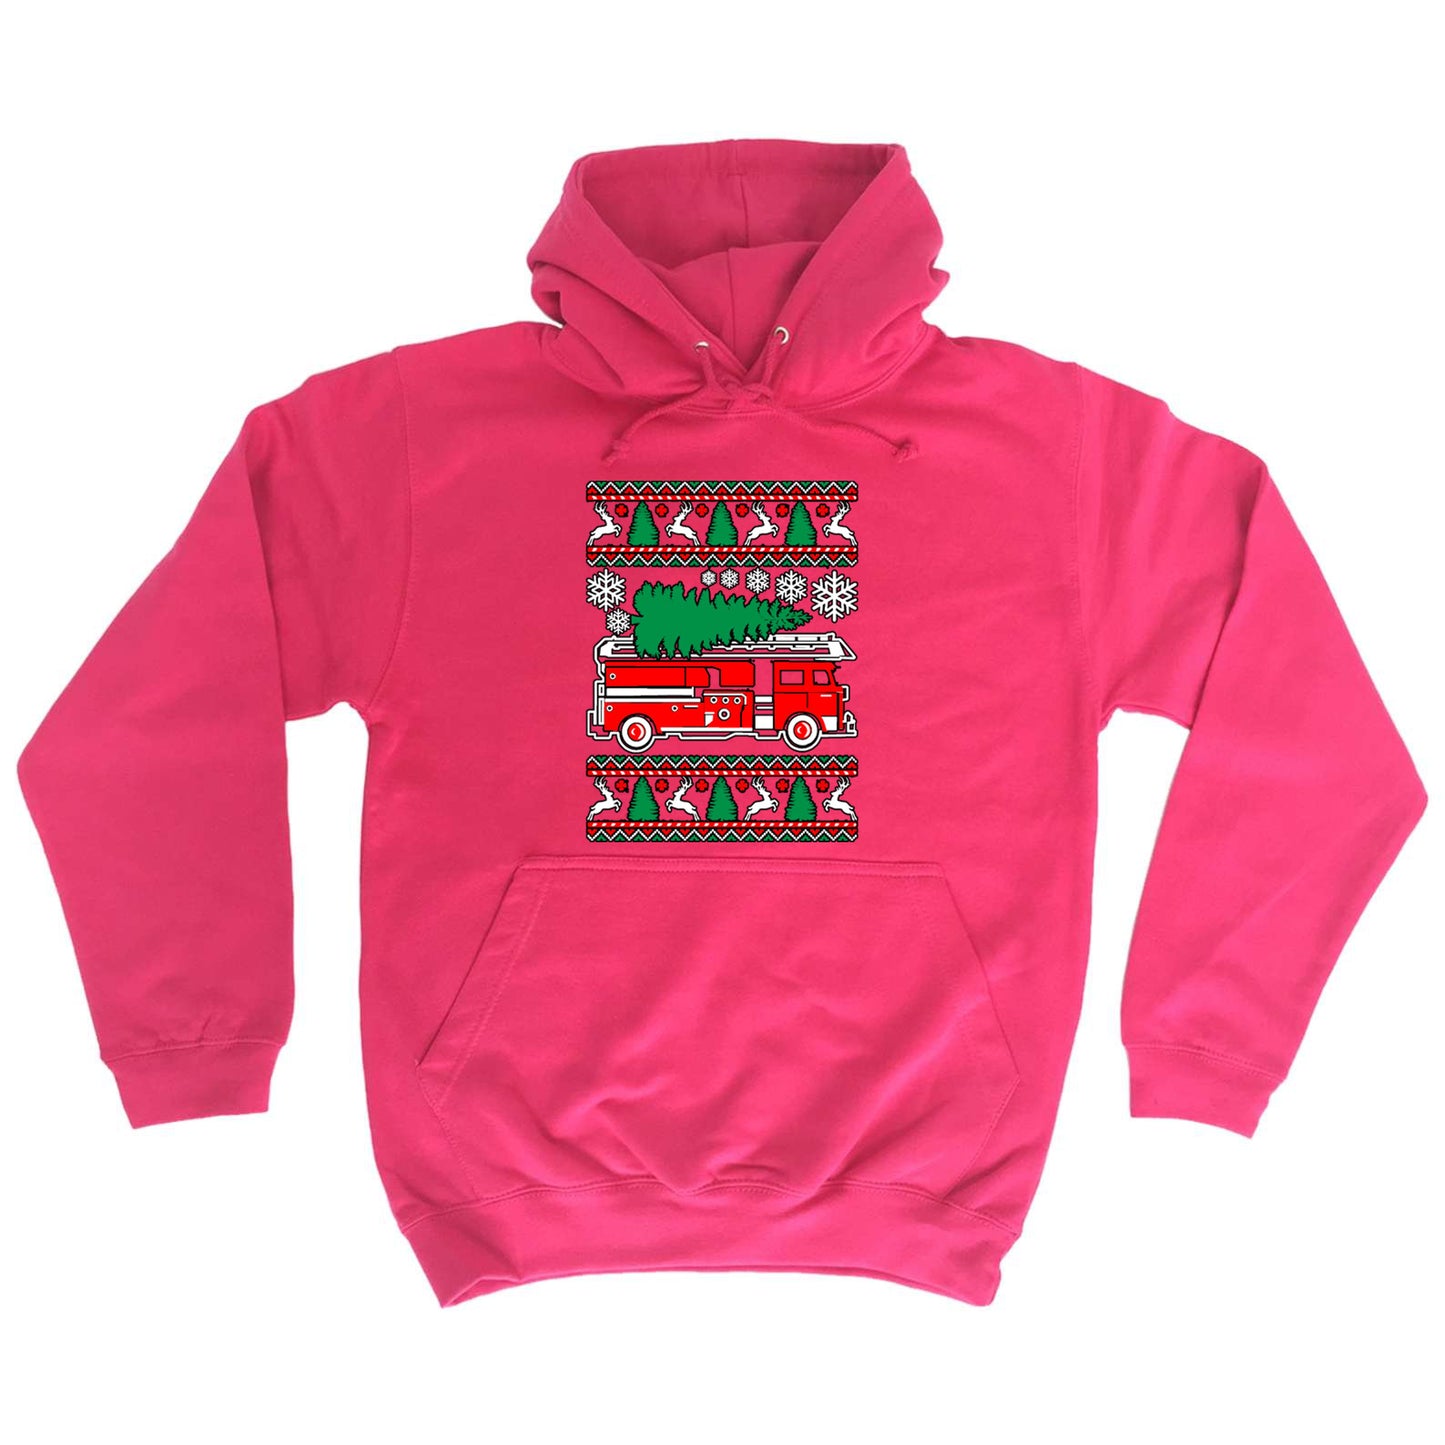 Fire Fighter Engine Christmas Xmas - Funny Novelty Hoodies Hoodie